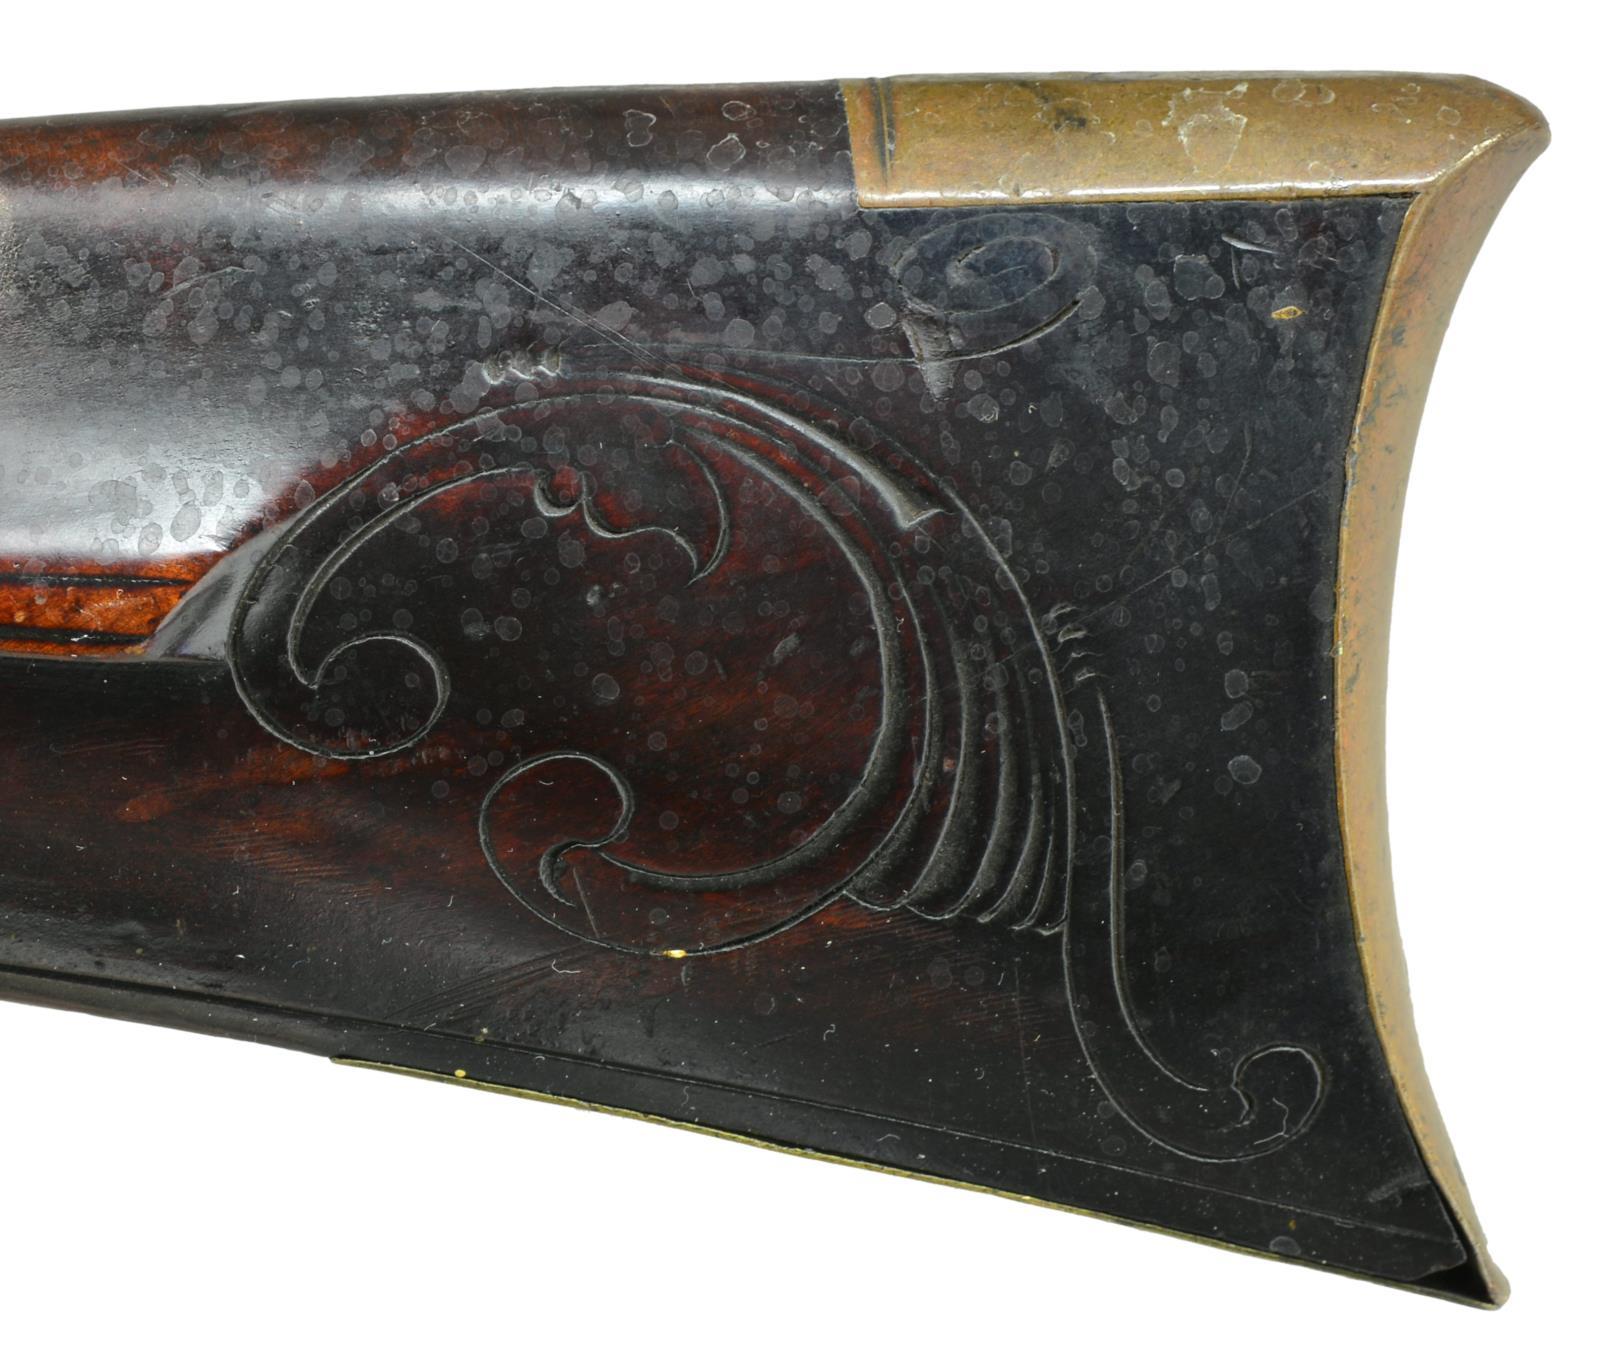 VERY NICE FLINTLOCK RIFLE BY GEORGE SMITH FROM NEW